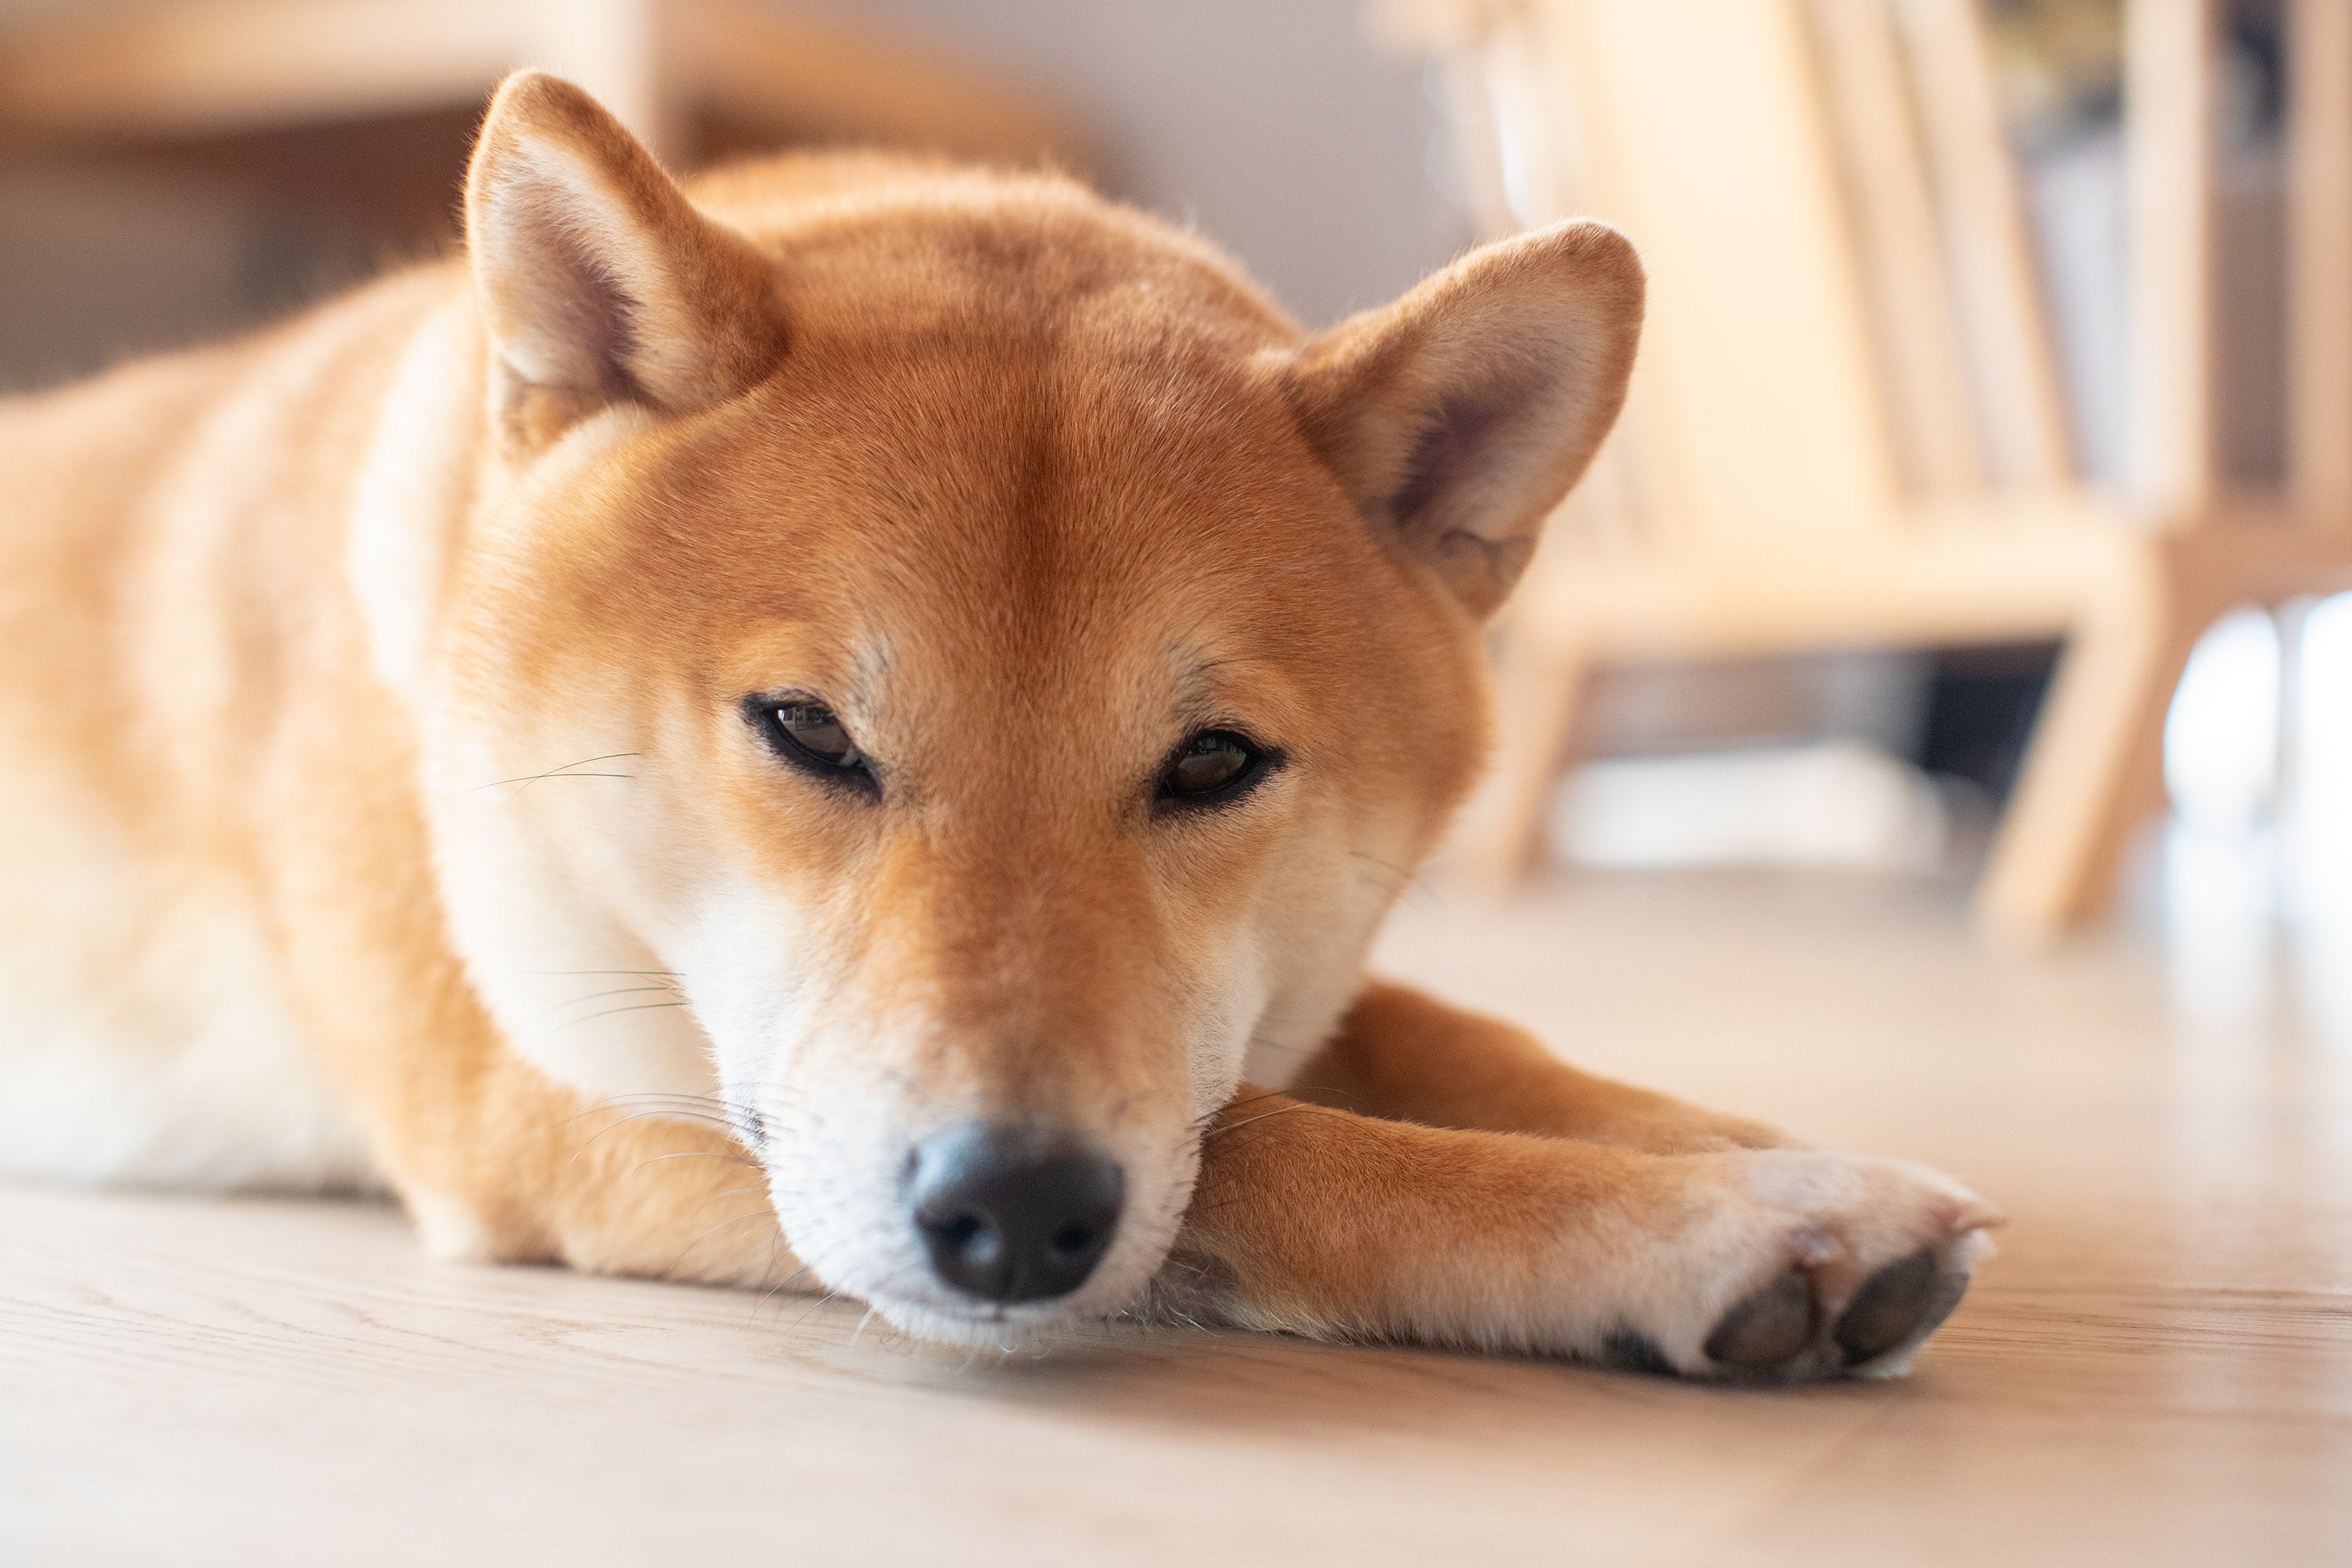 Shiba Inu Crypto Twitter - Nd2vow6xlzli9m - Details on how ...